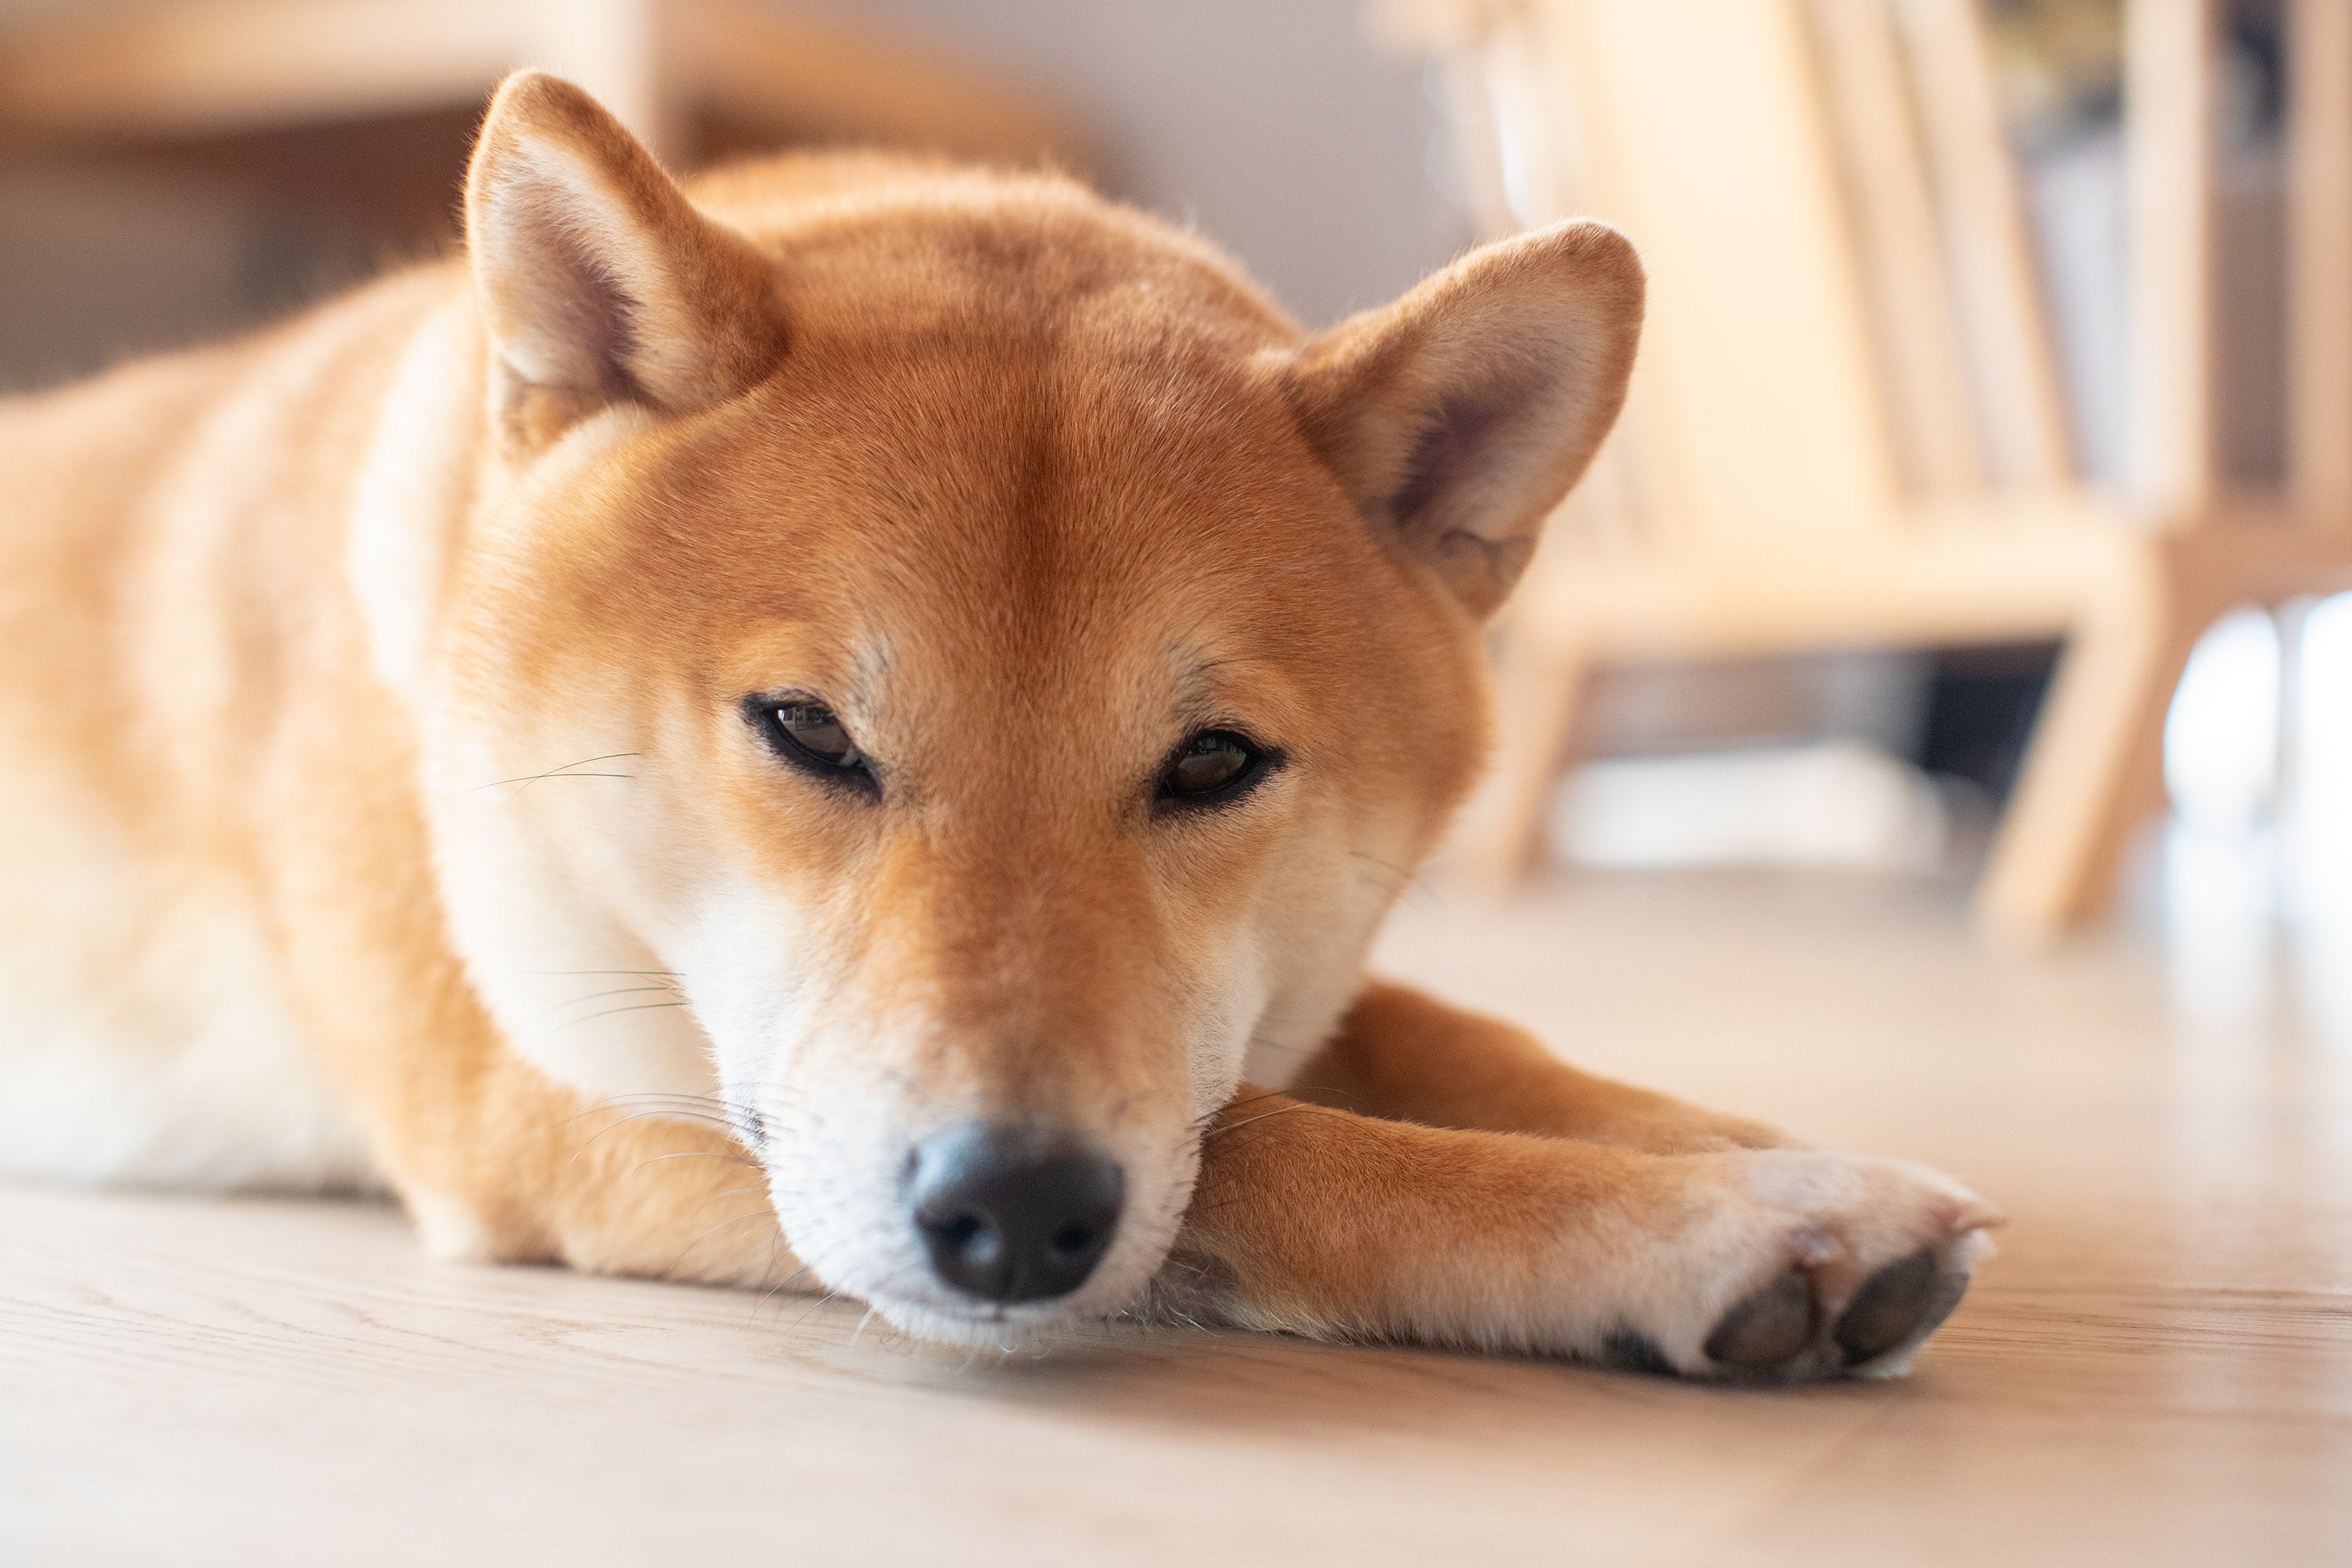 Shiba Inu Crypto Twitter - Nd2vow6xlzli9m - Details on how ...